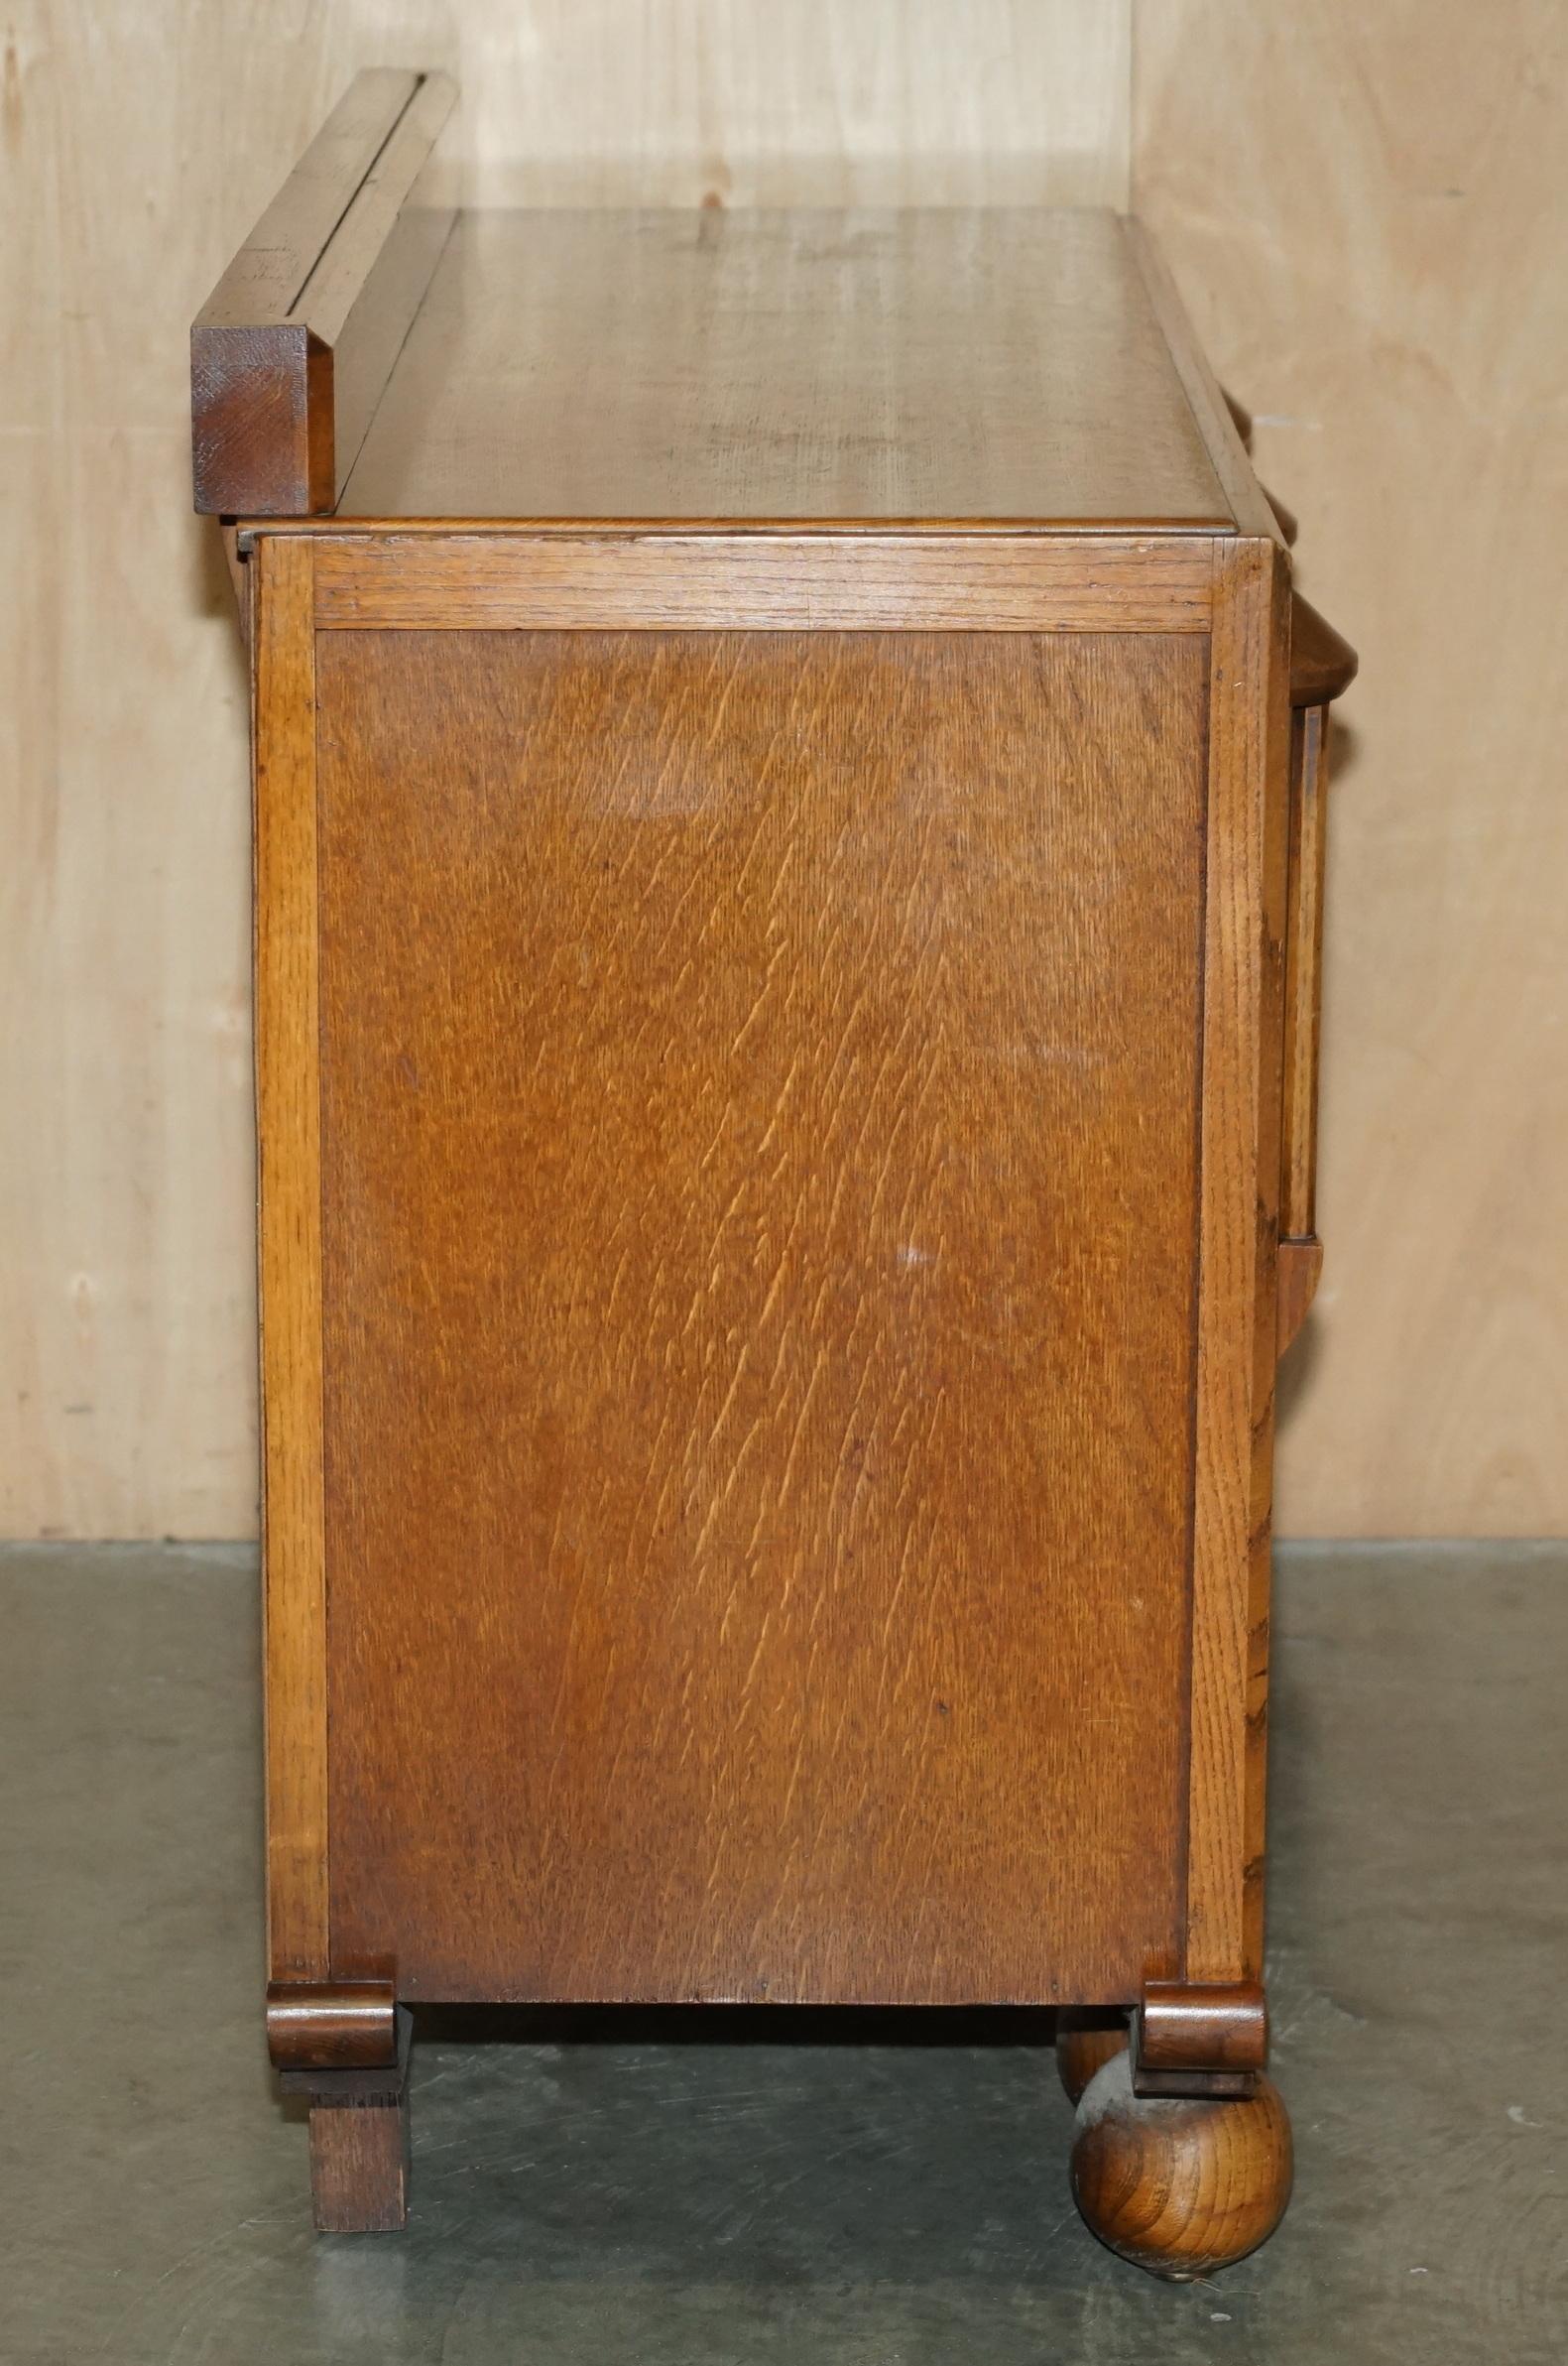 FINE LIBERTY'S COTSWOLD ART DECO OAK CARVED SiDEBOARD CIRCA 1920 PART OF A SUITE For Sale 7